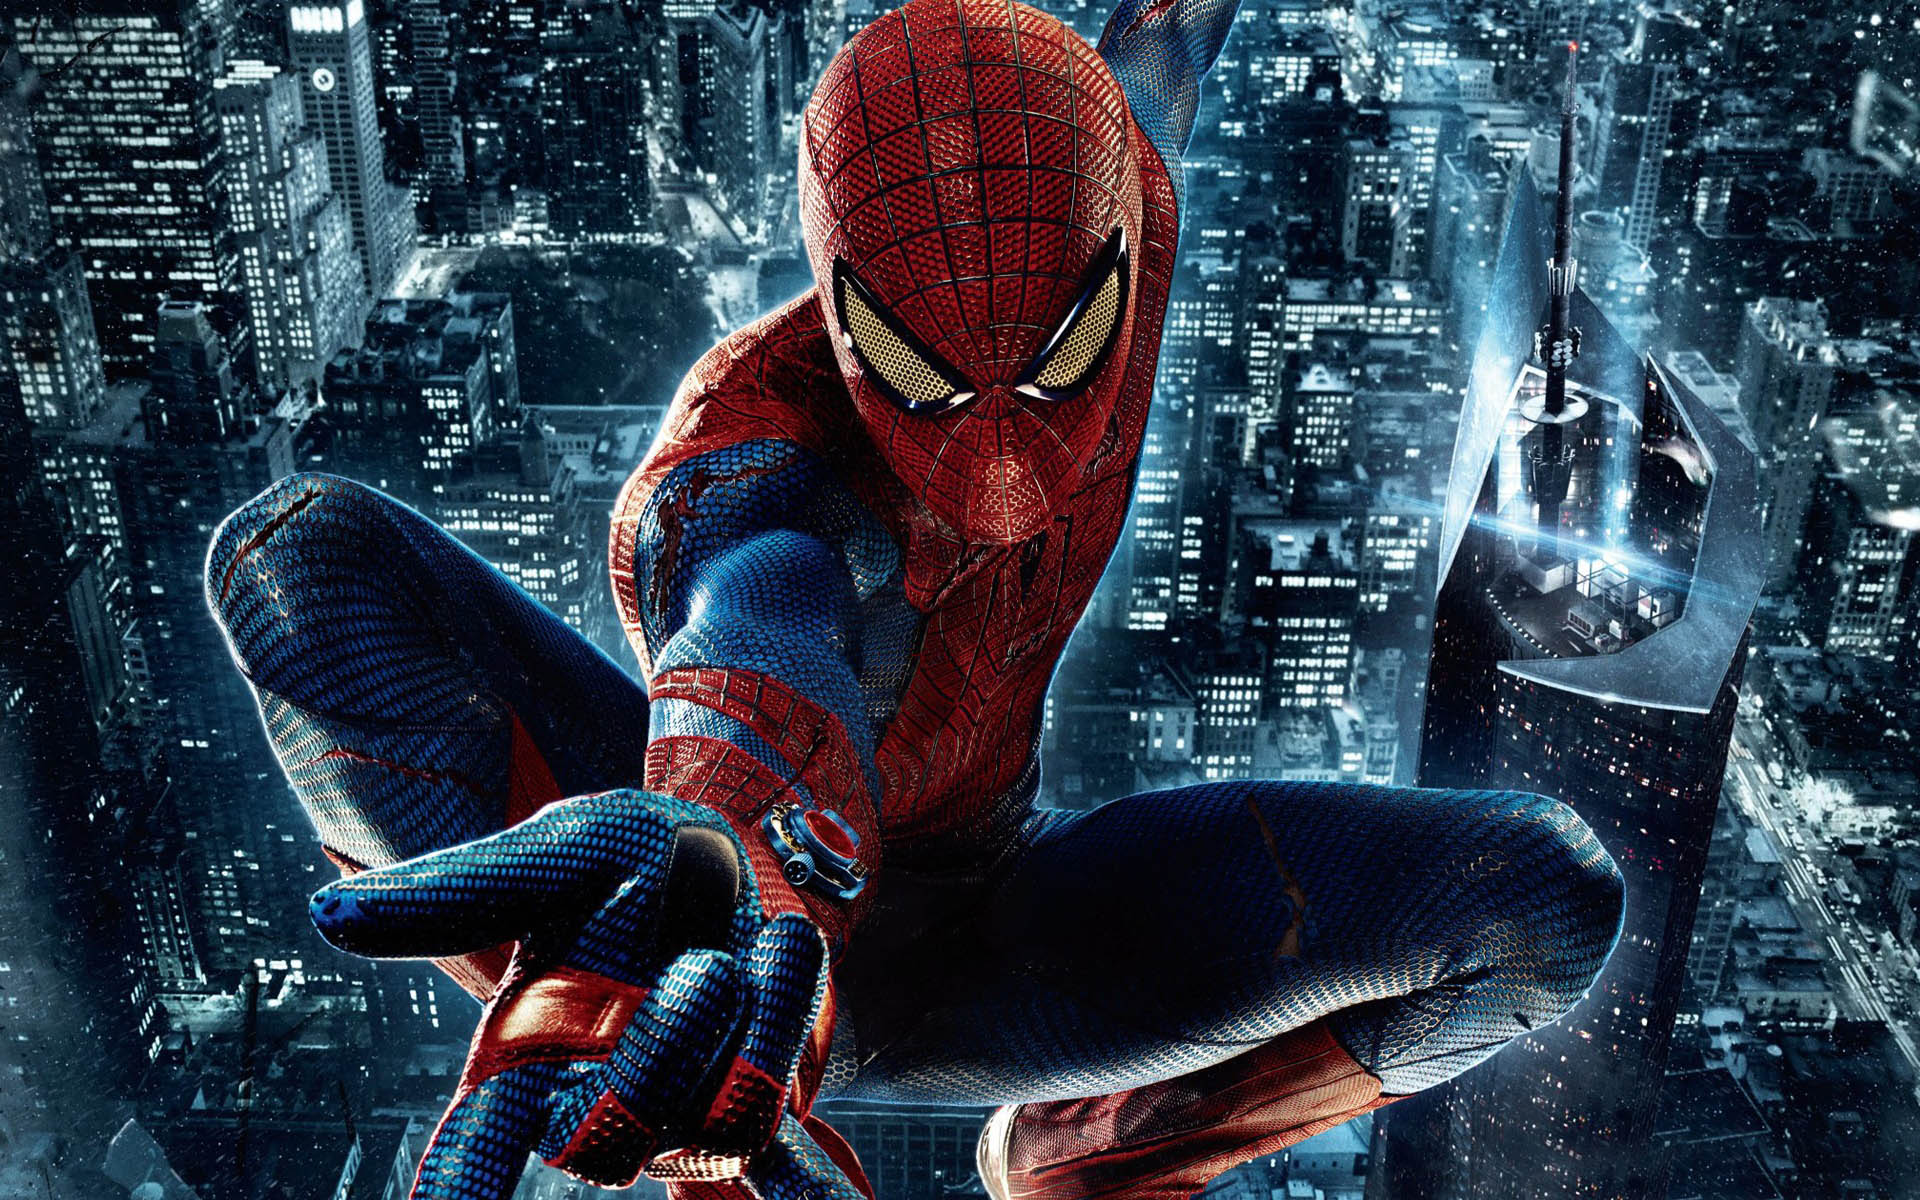 The Amazing Spider-Man 2 cancelled on Xbox One? – Eggplante!